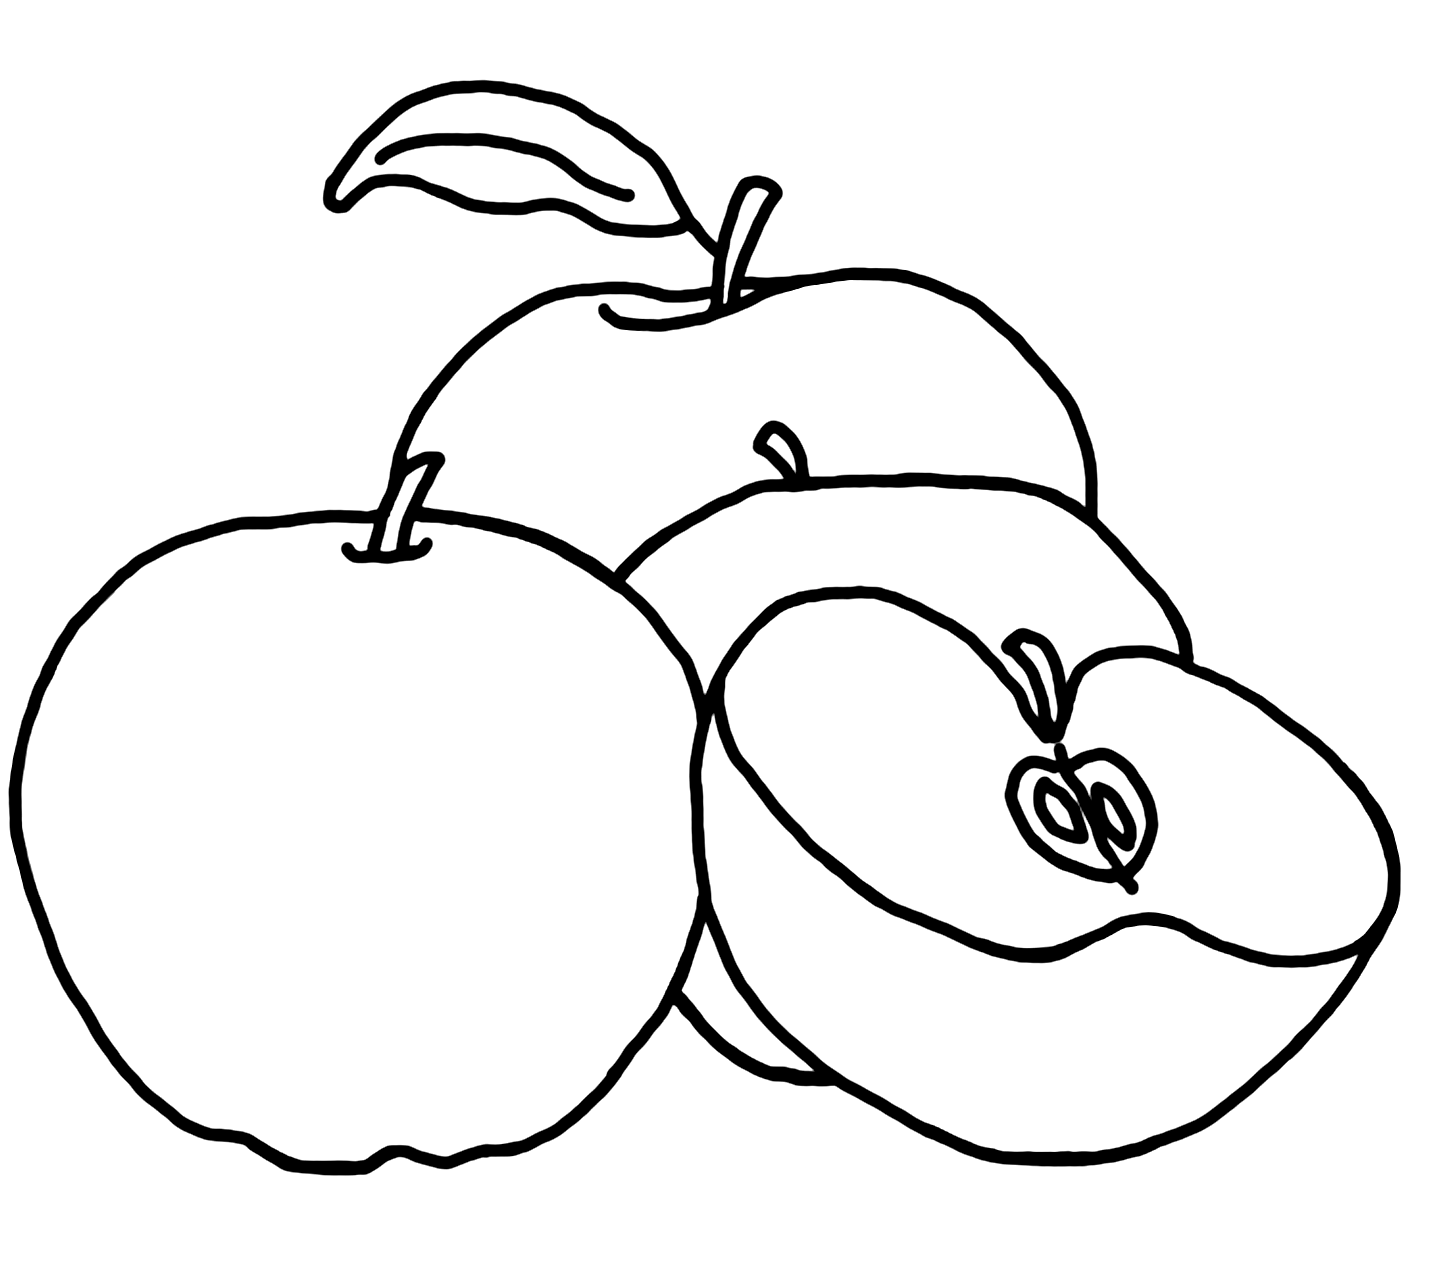 Apples Coloring Page